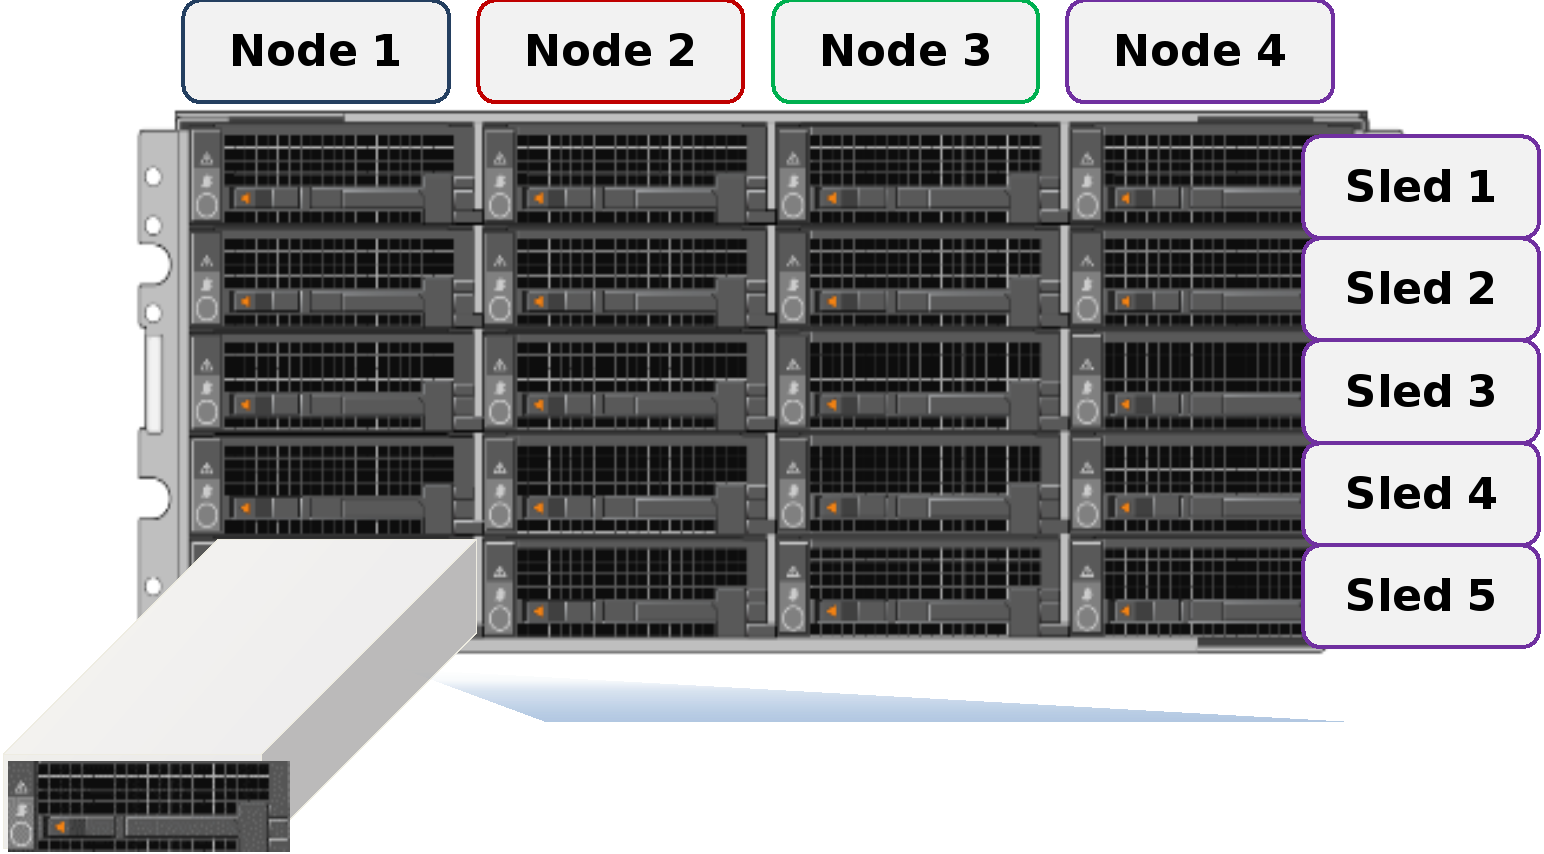 Graphic depicting disk pools within a modular chassis-based node.